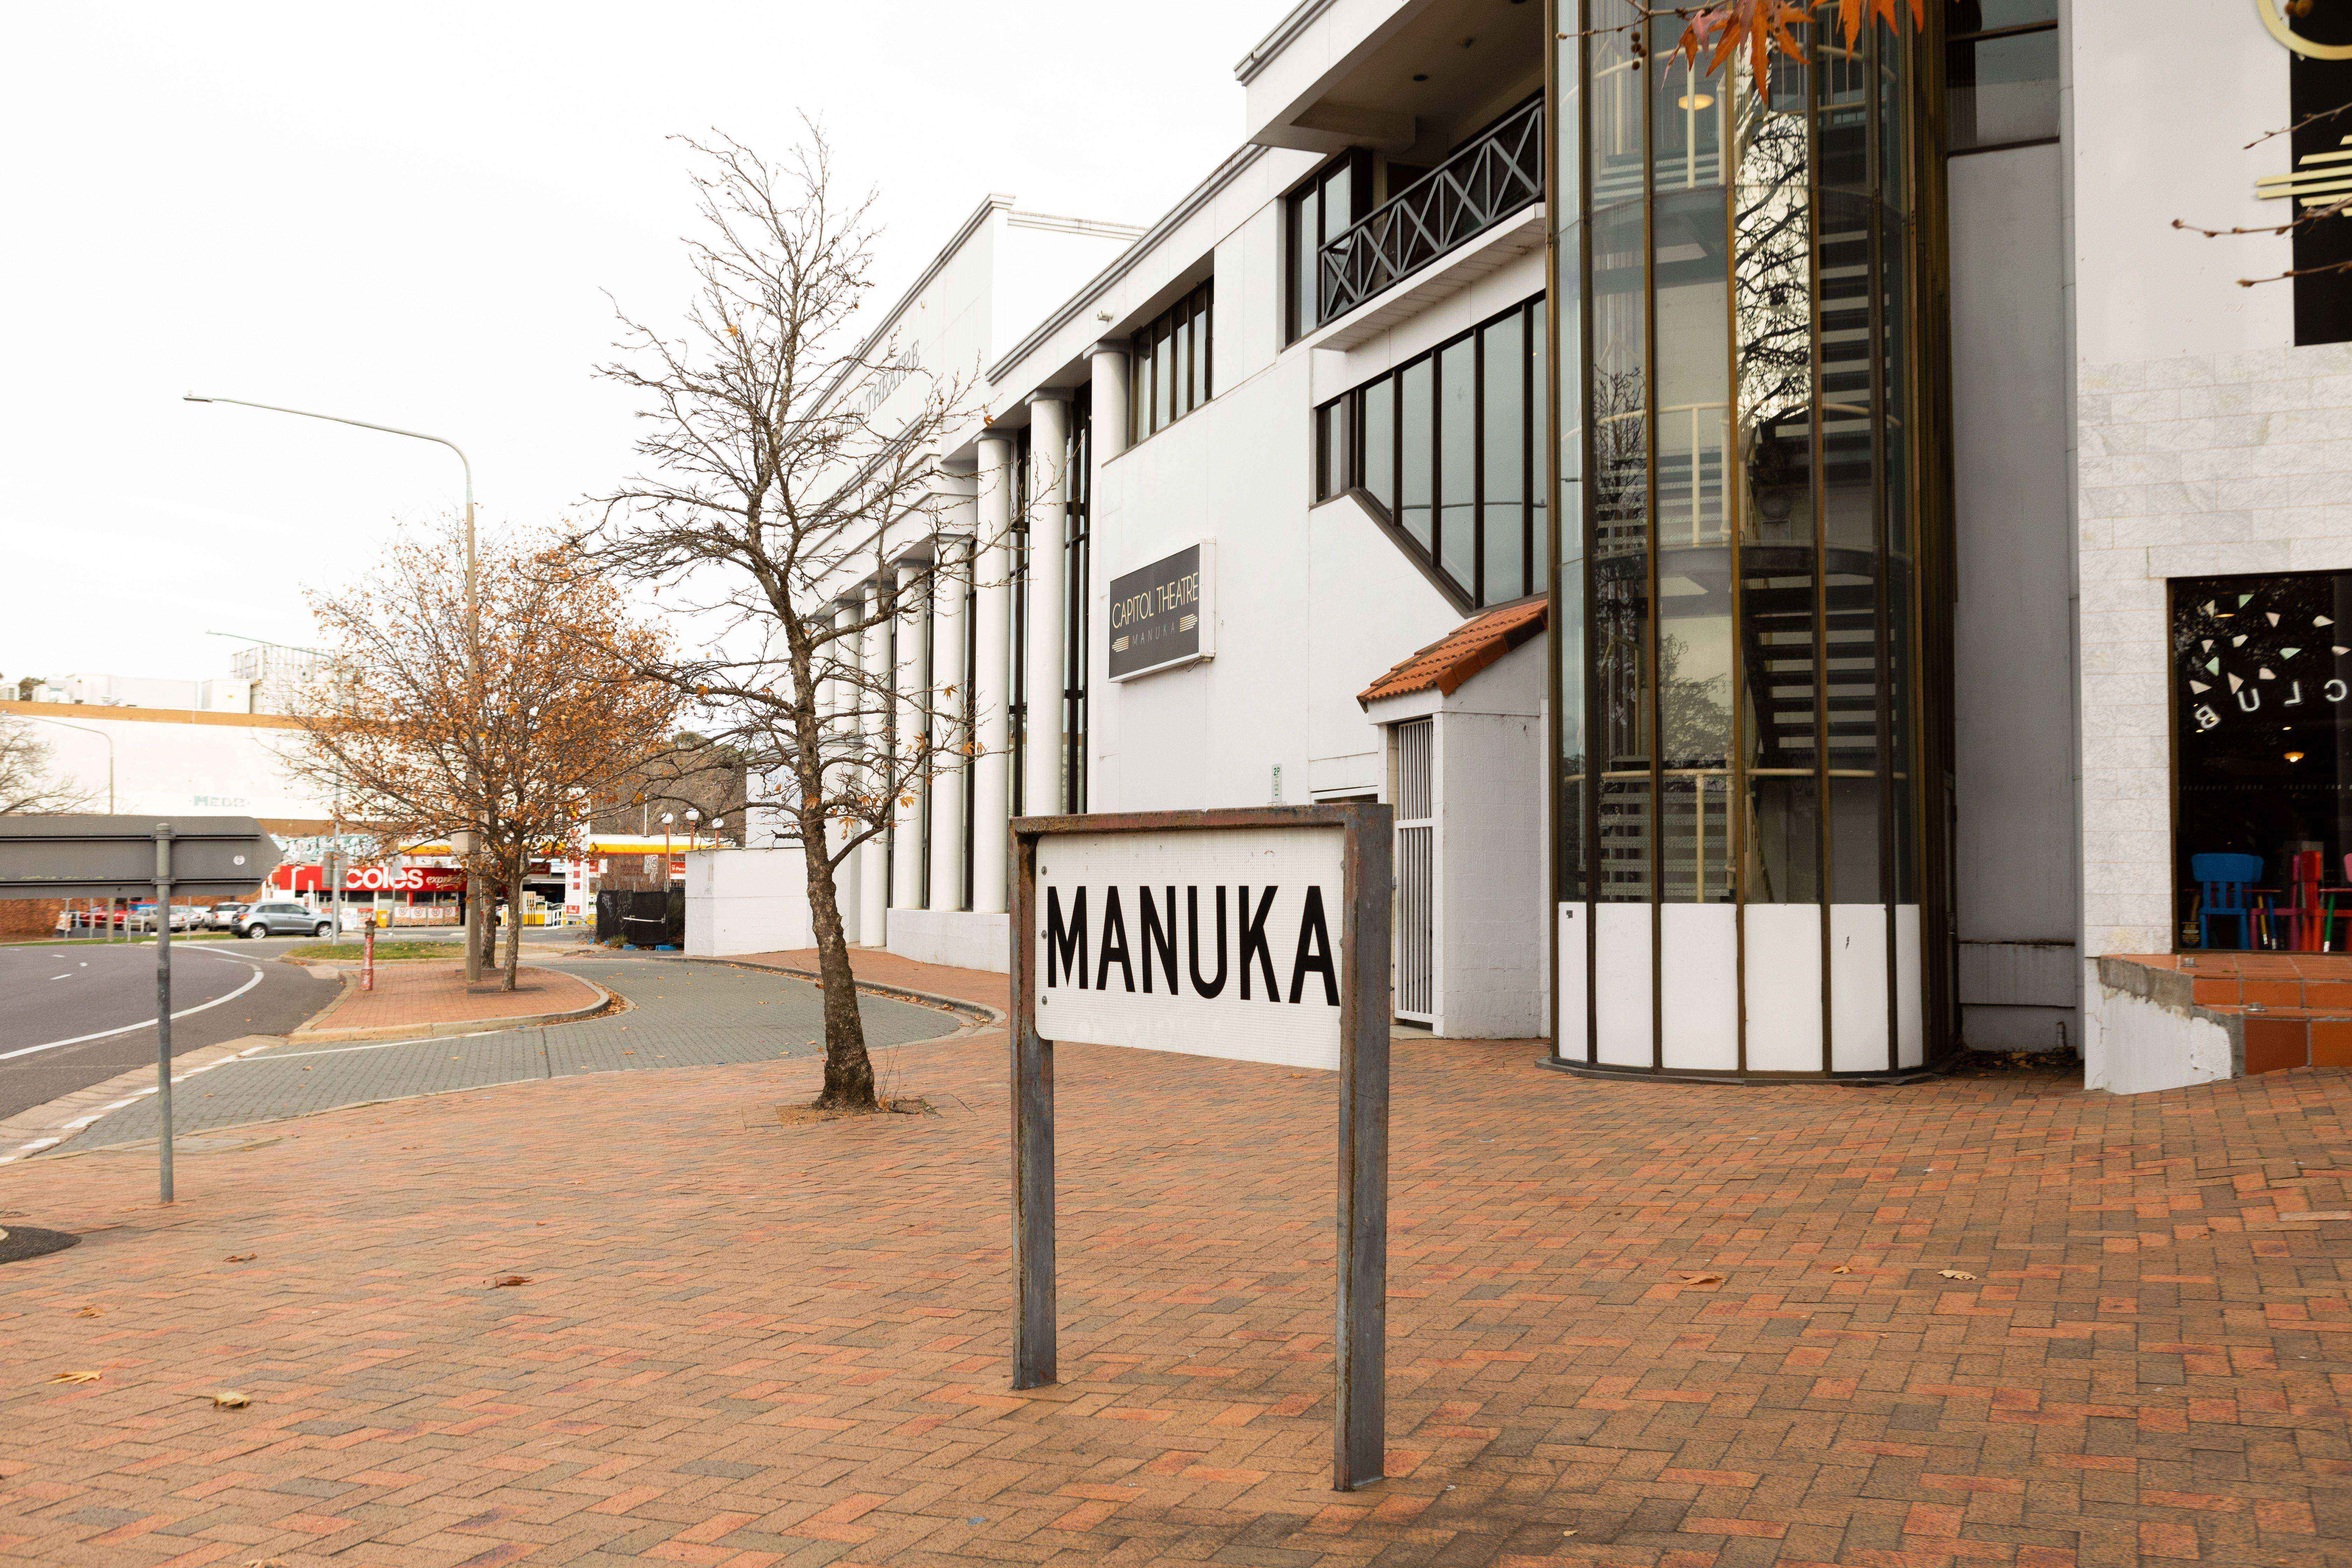 Developer moves to consolidate blocks for Manuka hotel project